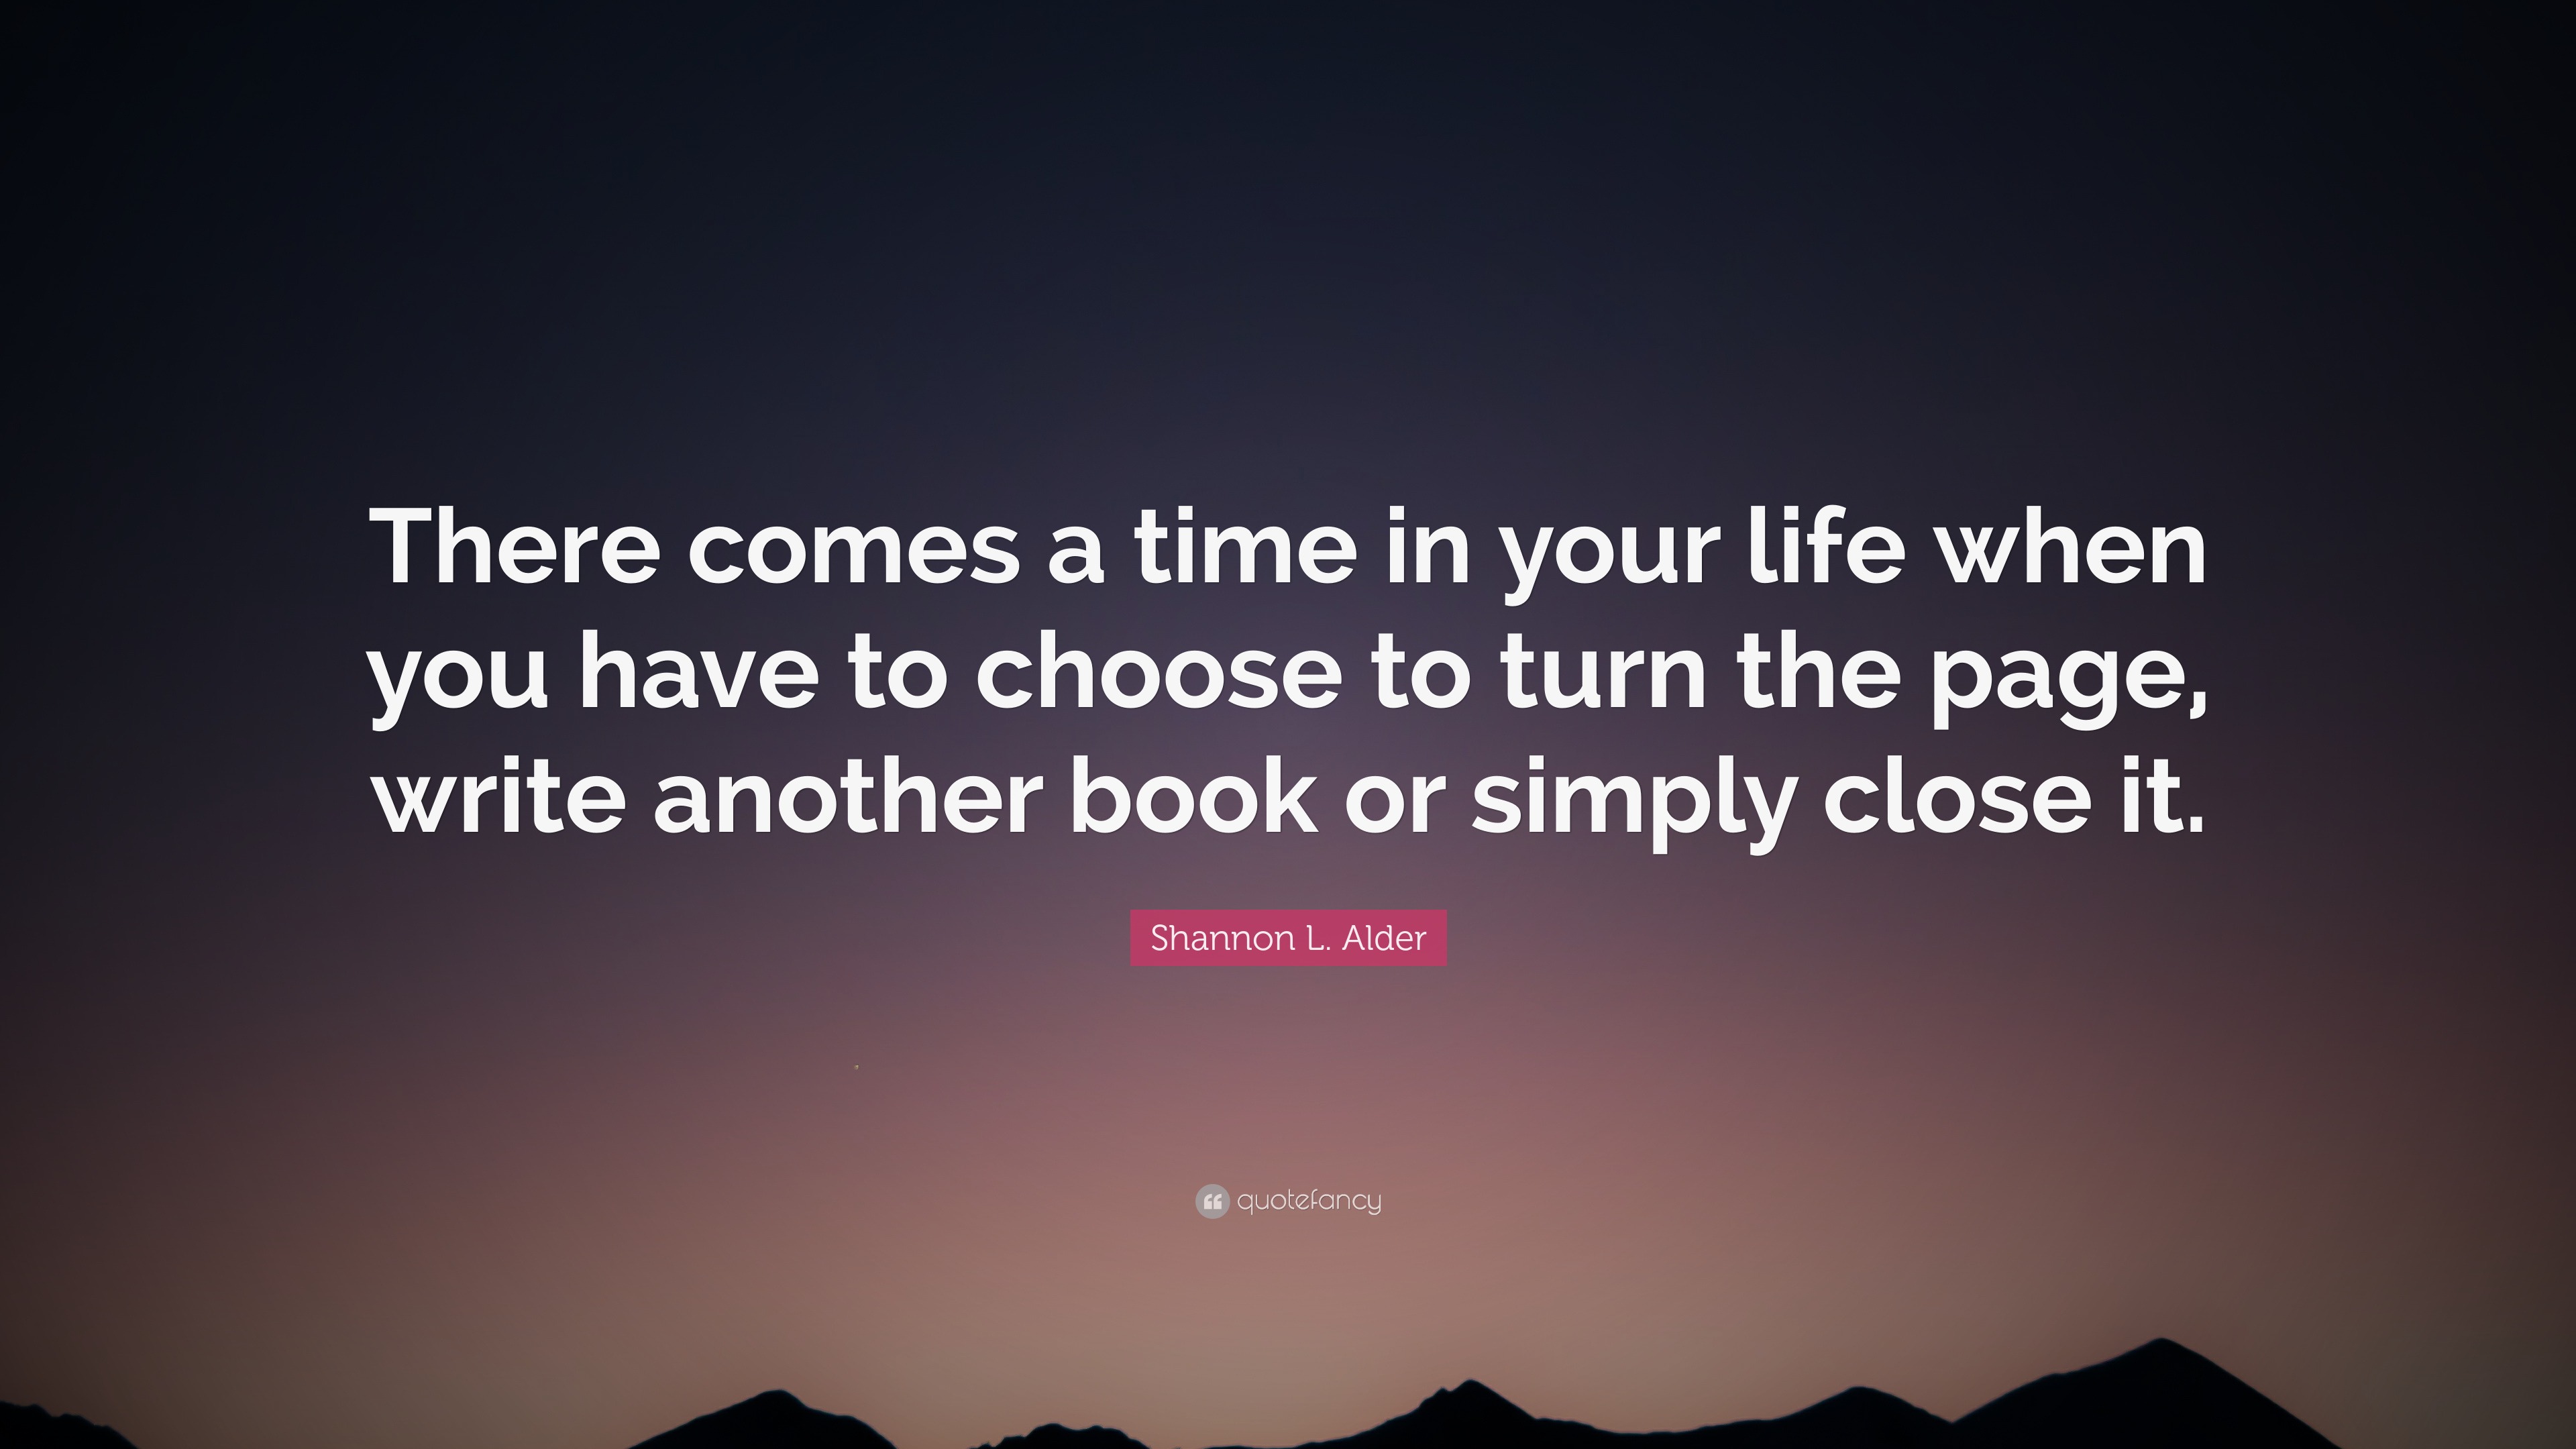 Shannon L Alder Quote There Comes A Time In Your Life When You Have To Choose